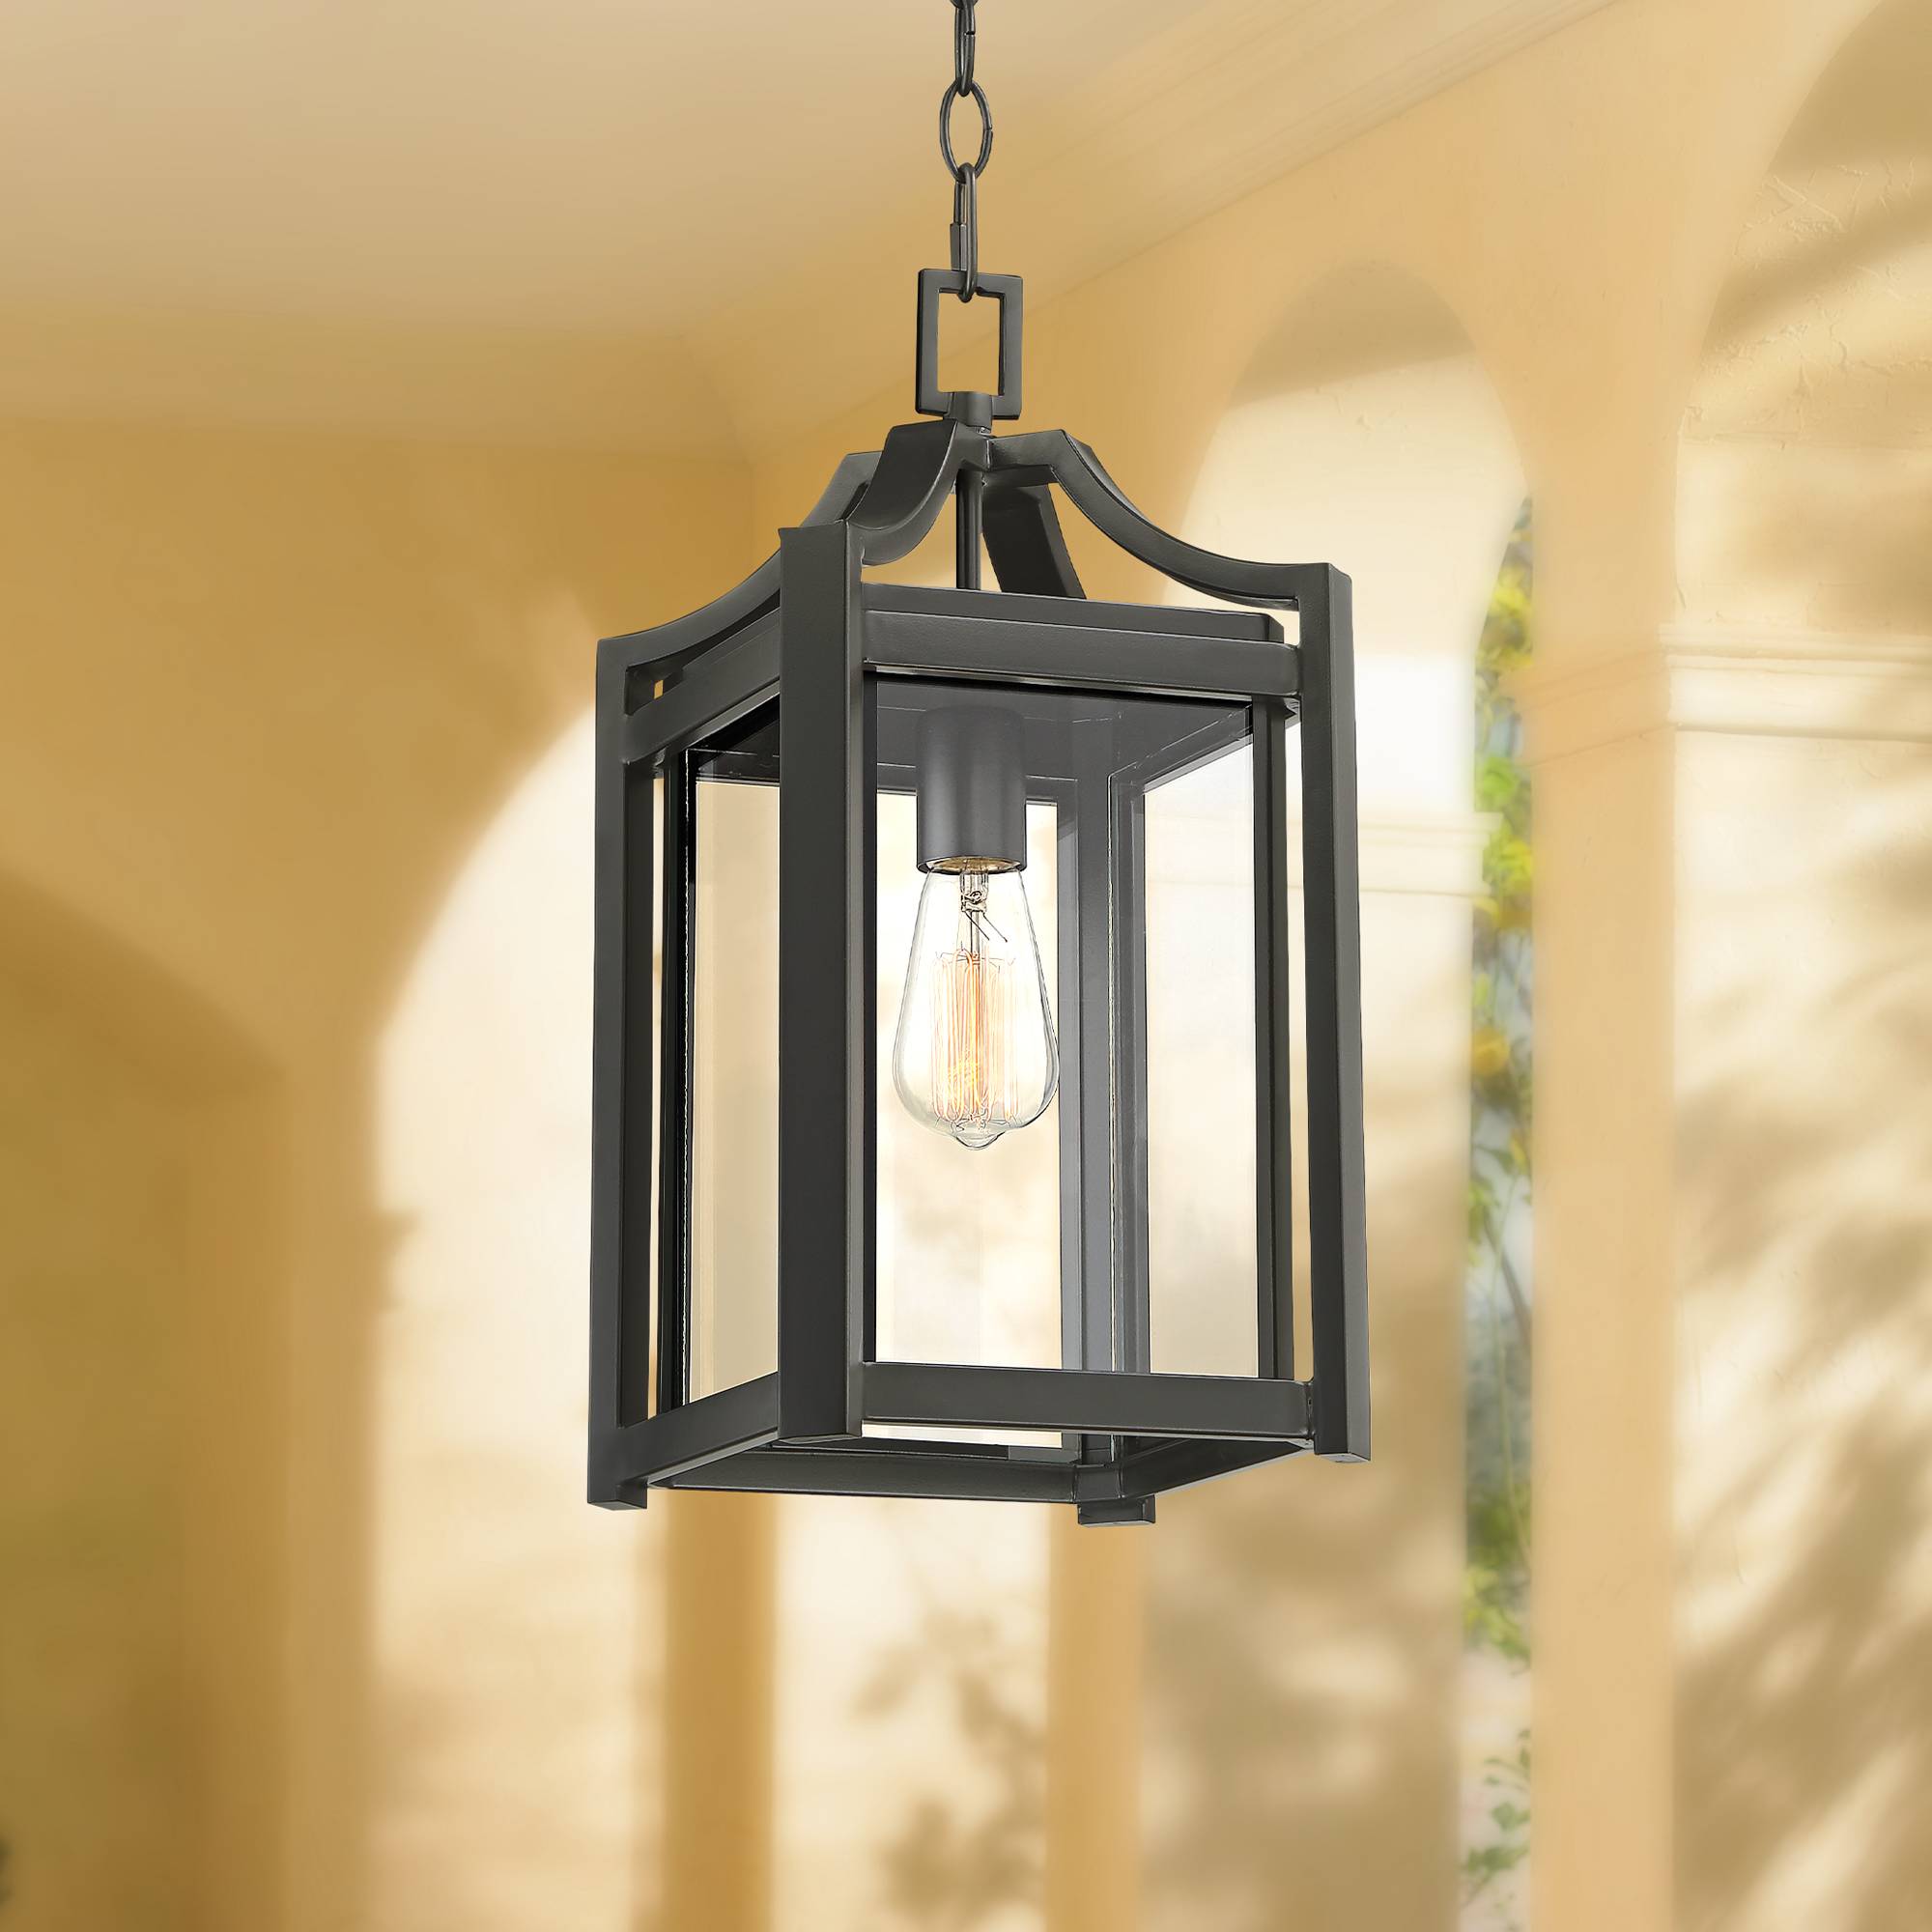 Details About Rustic Farmhouse Outdoor Ceiling Light Hanging Black 17 Clear Glass Porch Patio